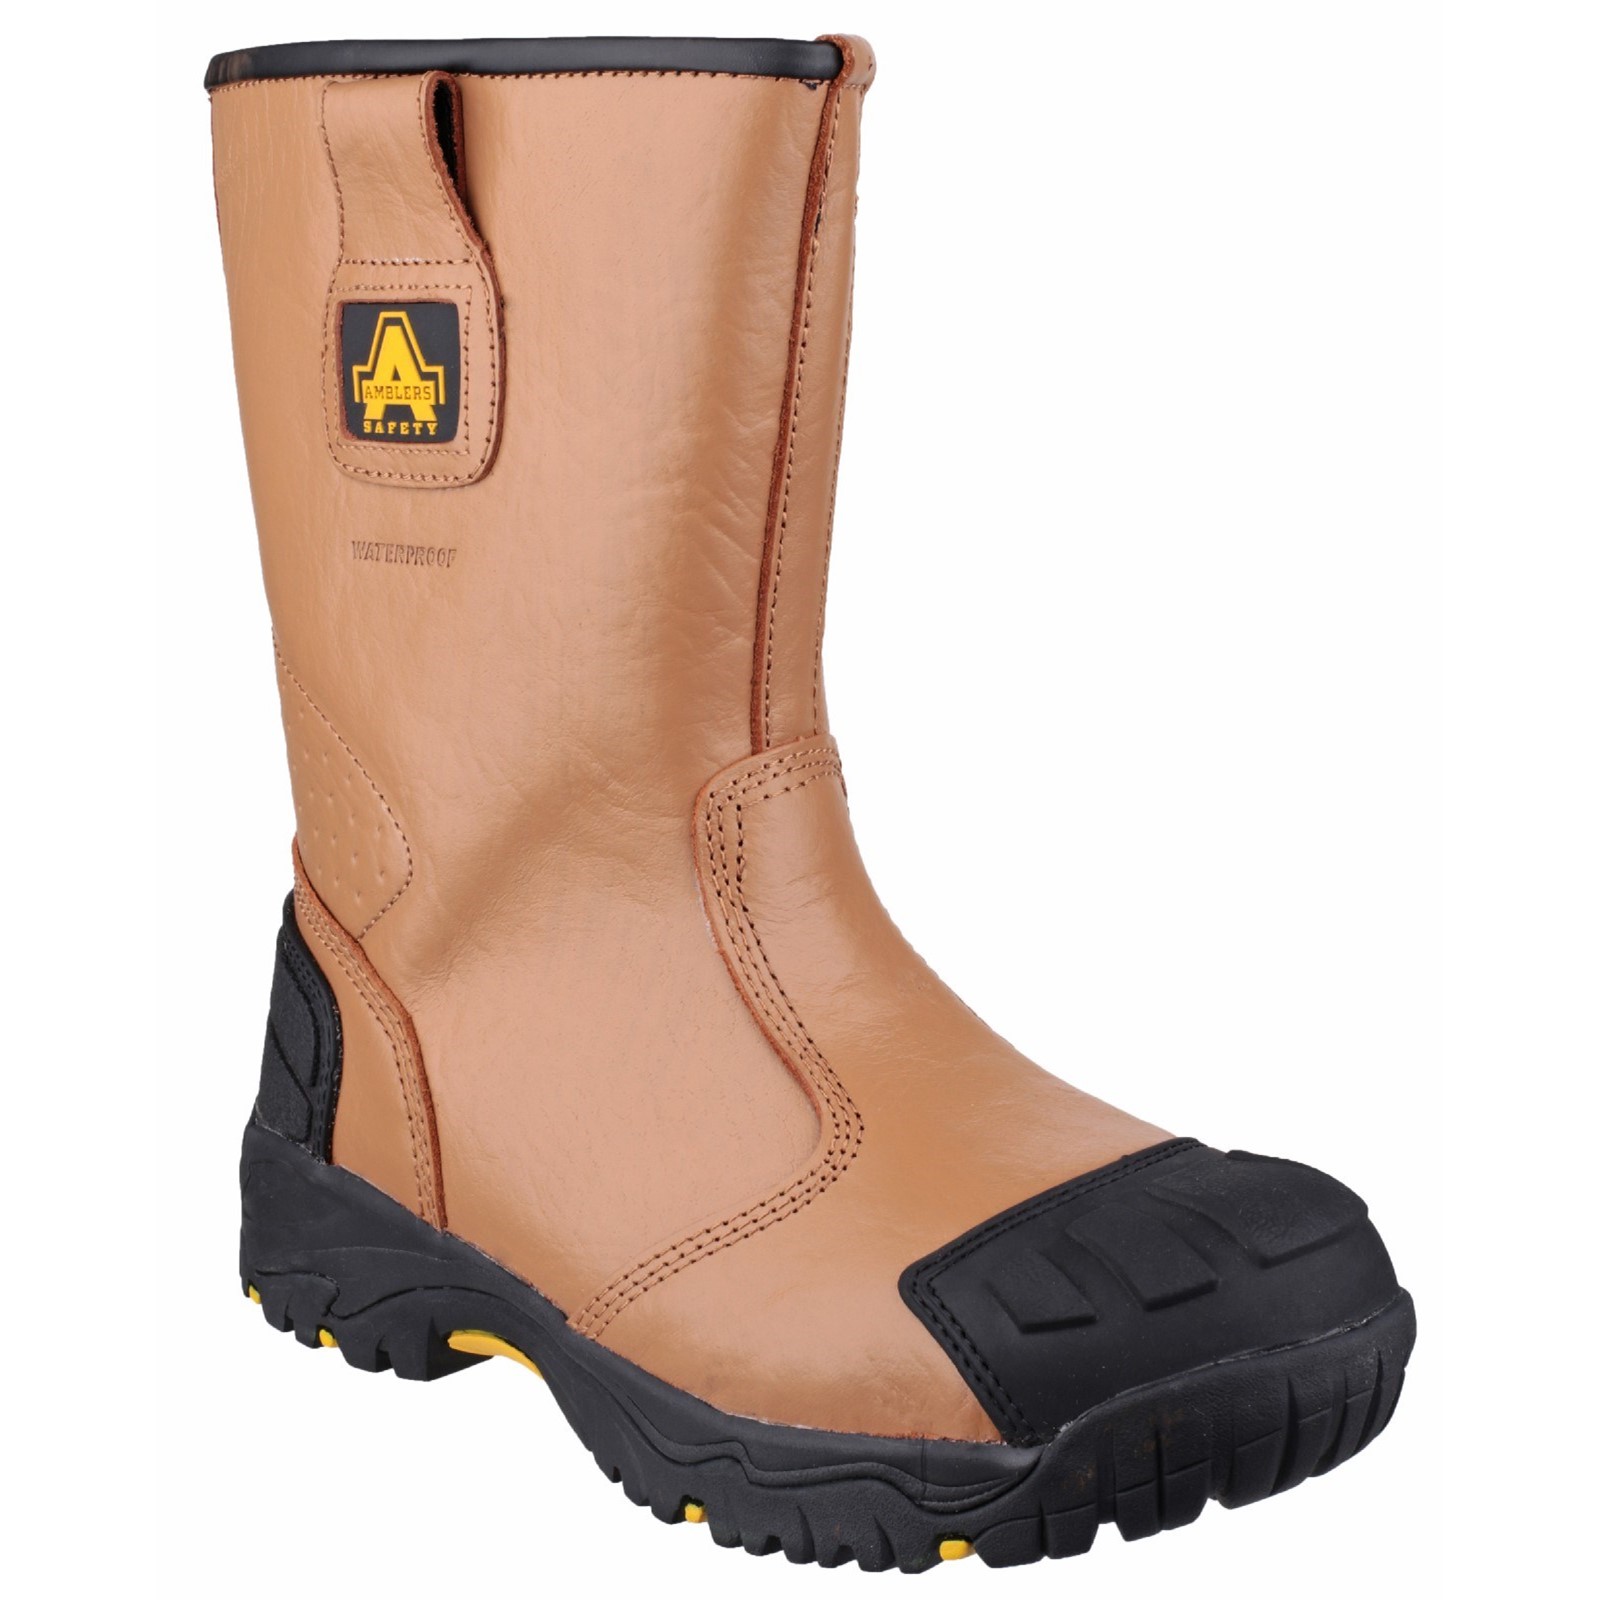 FS143 Waterproof pull on Safety Rigger Boot